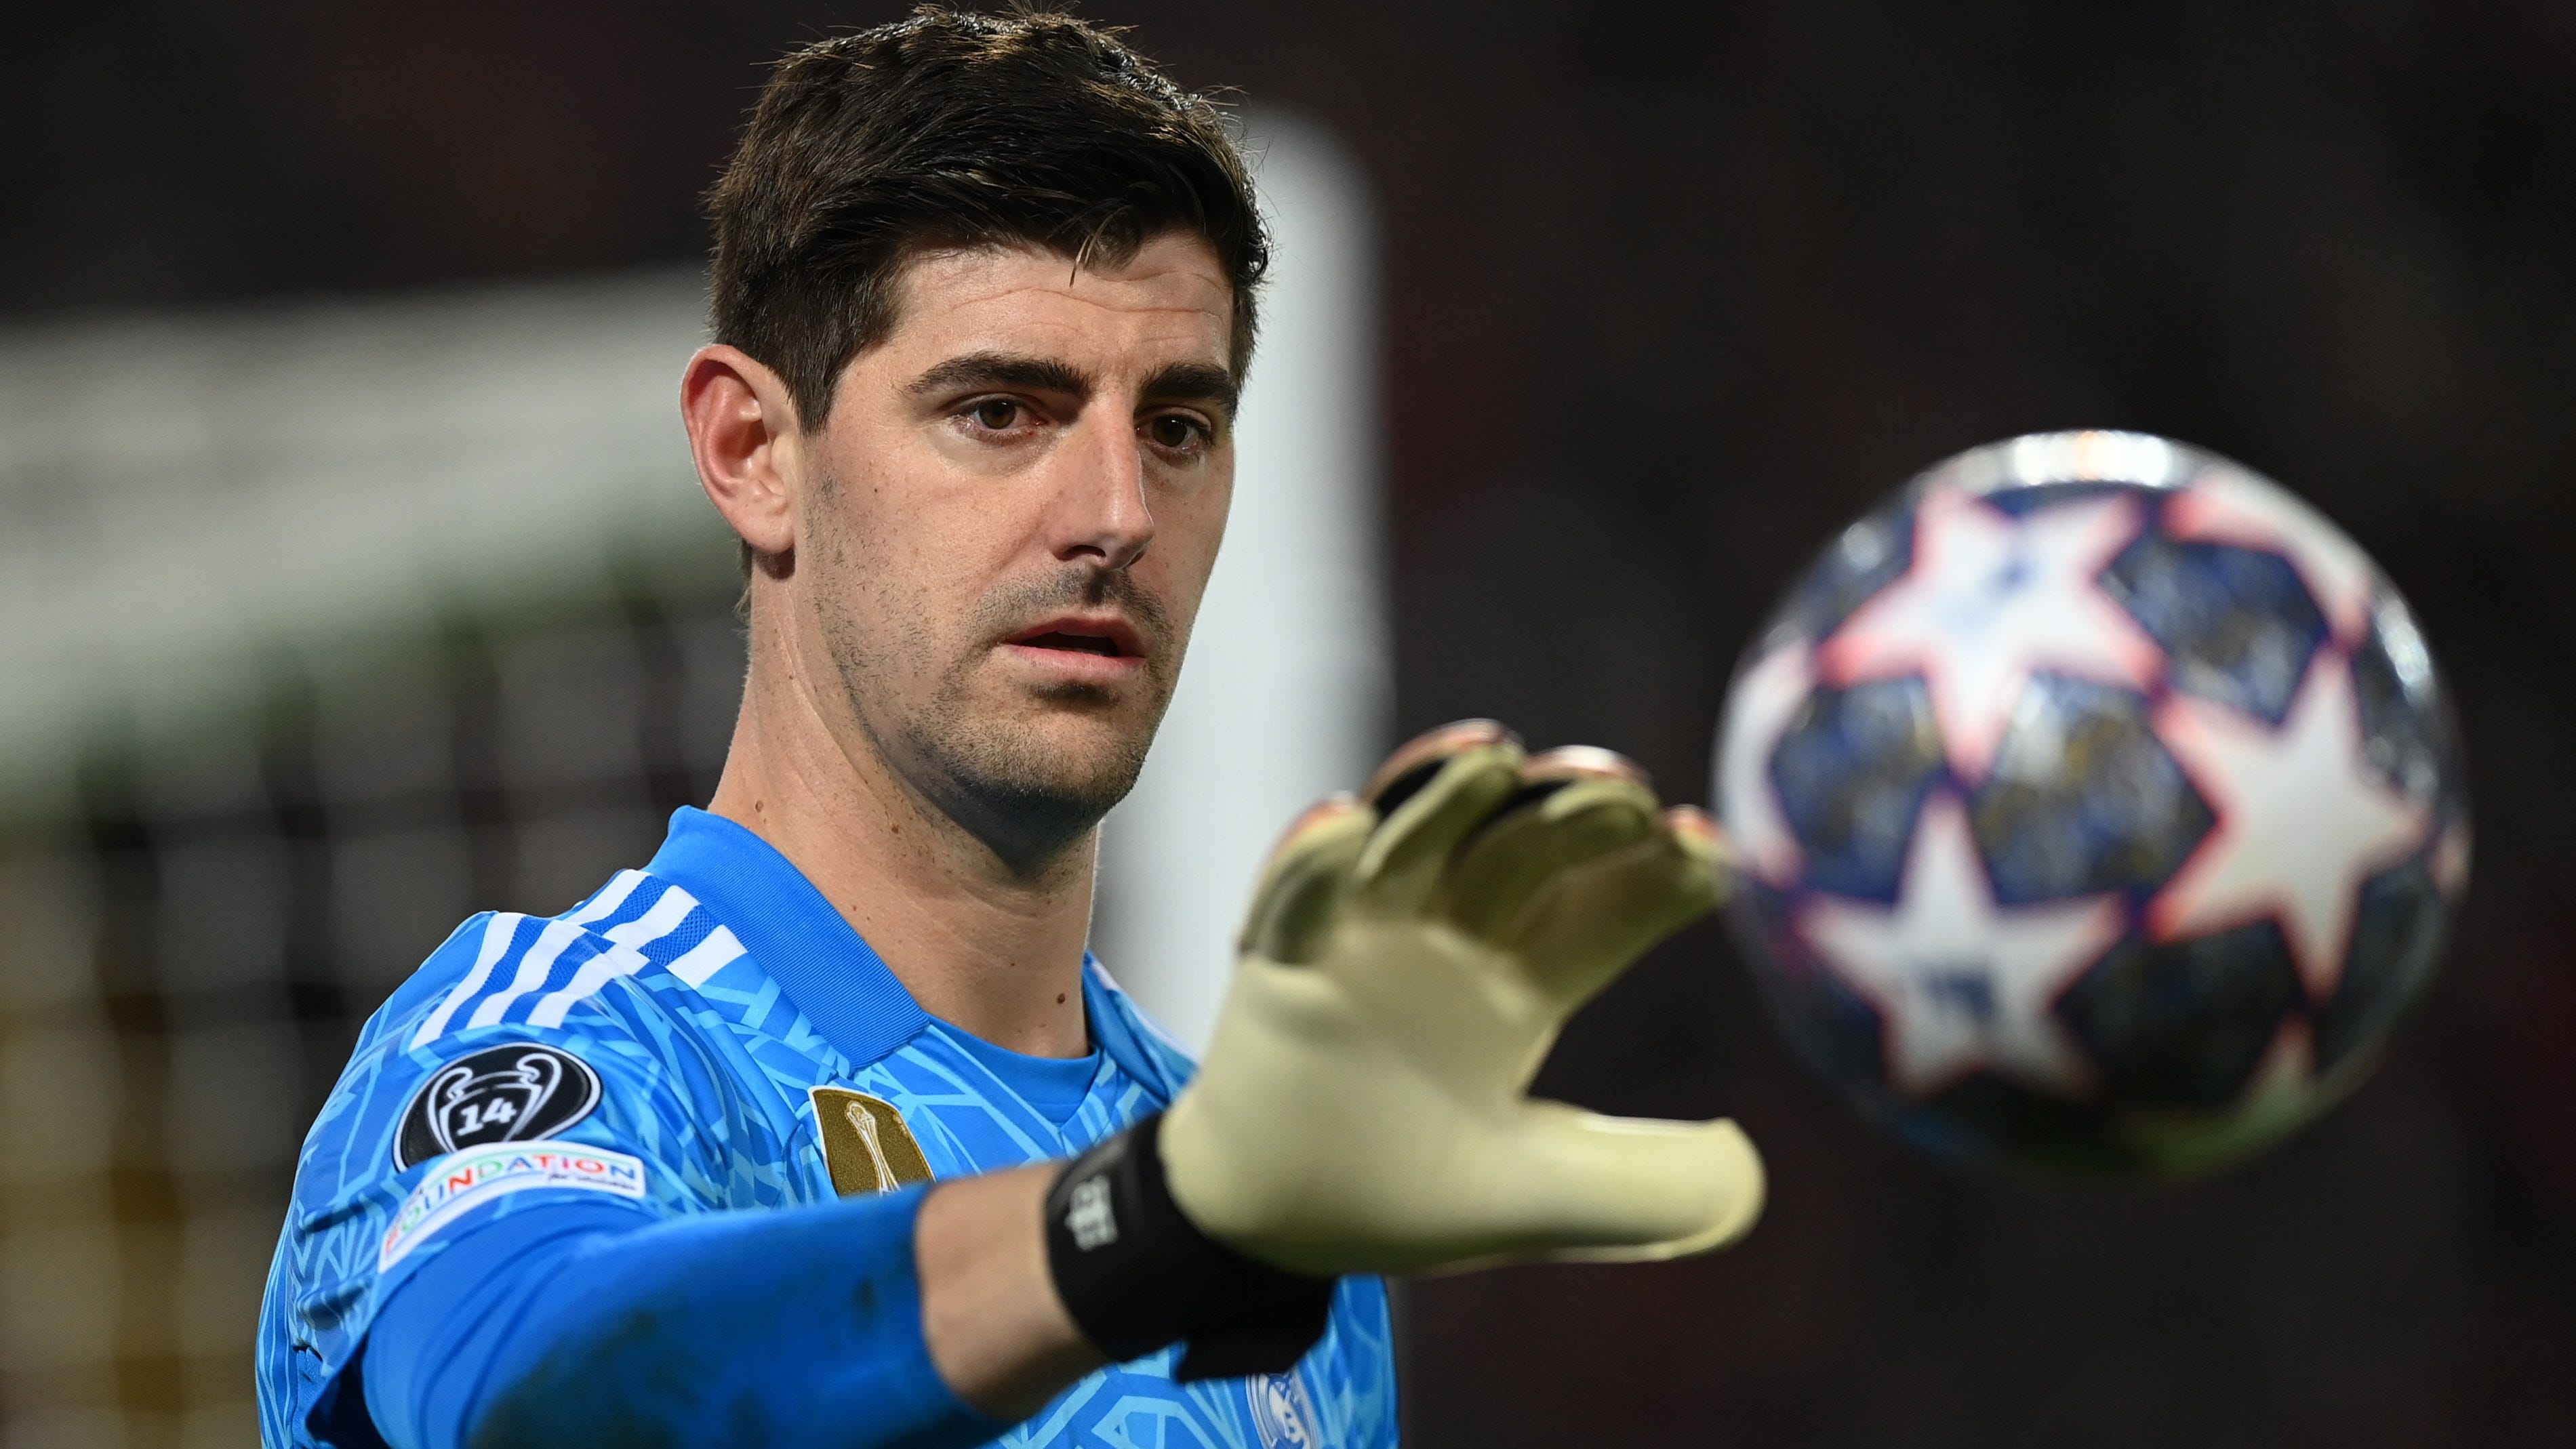 Major injury blow for Real Madrid as Thibaut Courtois tears his